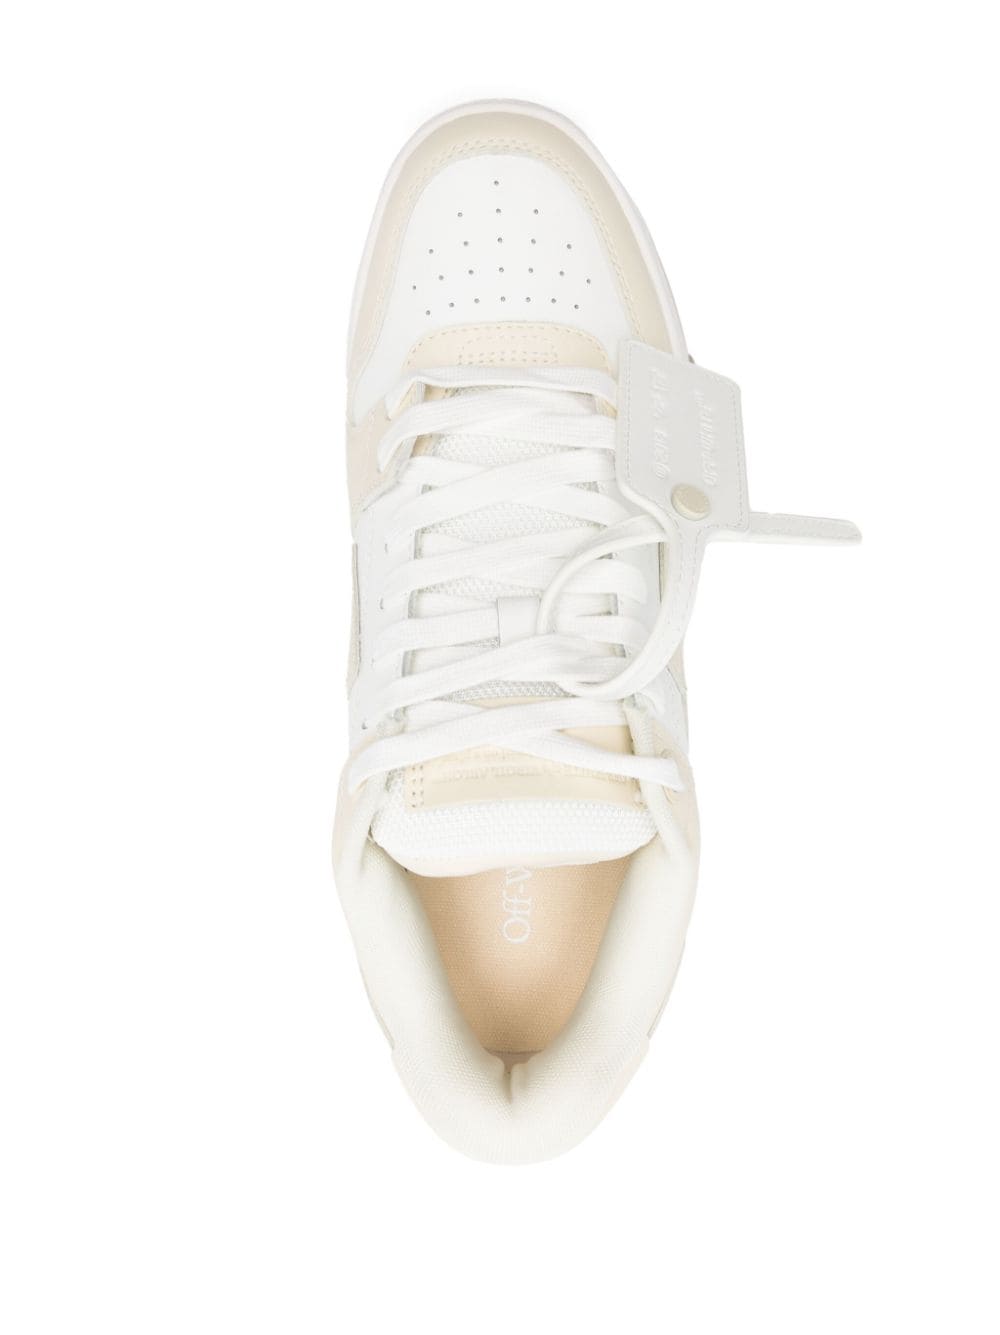 OFF-WHITE MEN Out Of Office Low Top Leather Sneakers White/Beige - MAISONDEFASHION.COM